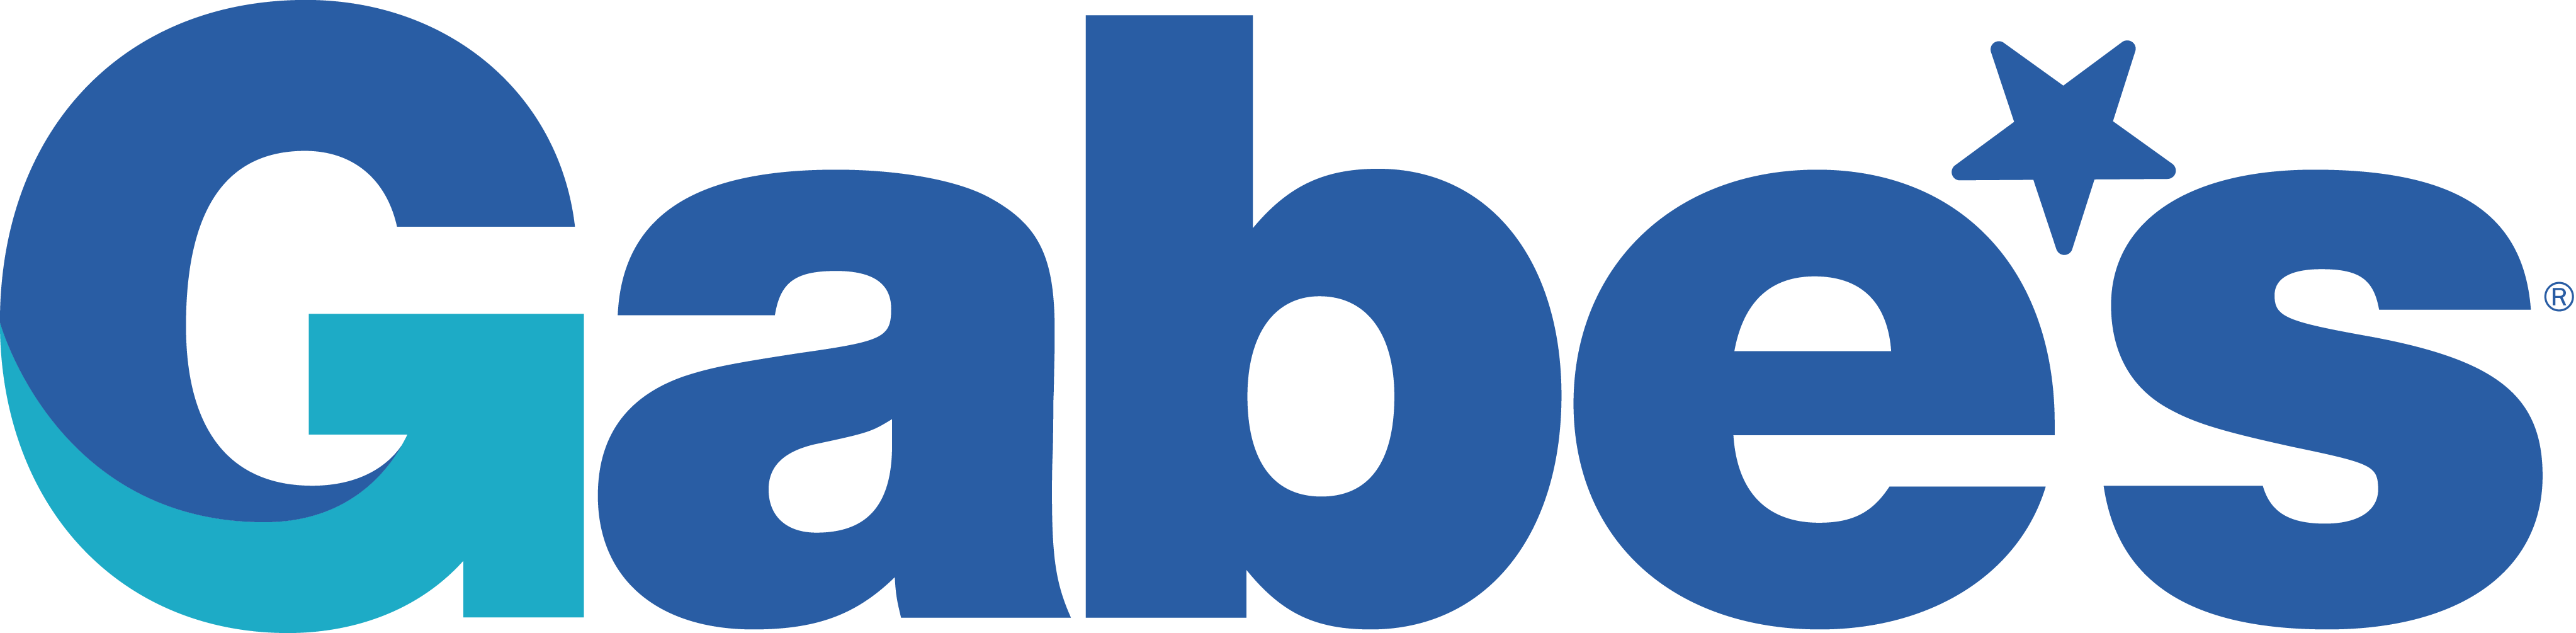 File:Gabe's logo.png - Wikimedia Commons